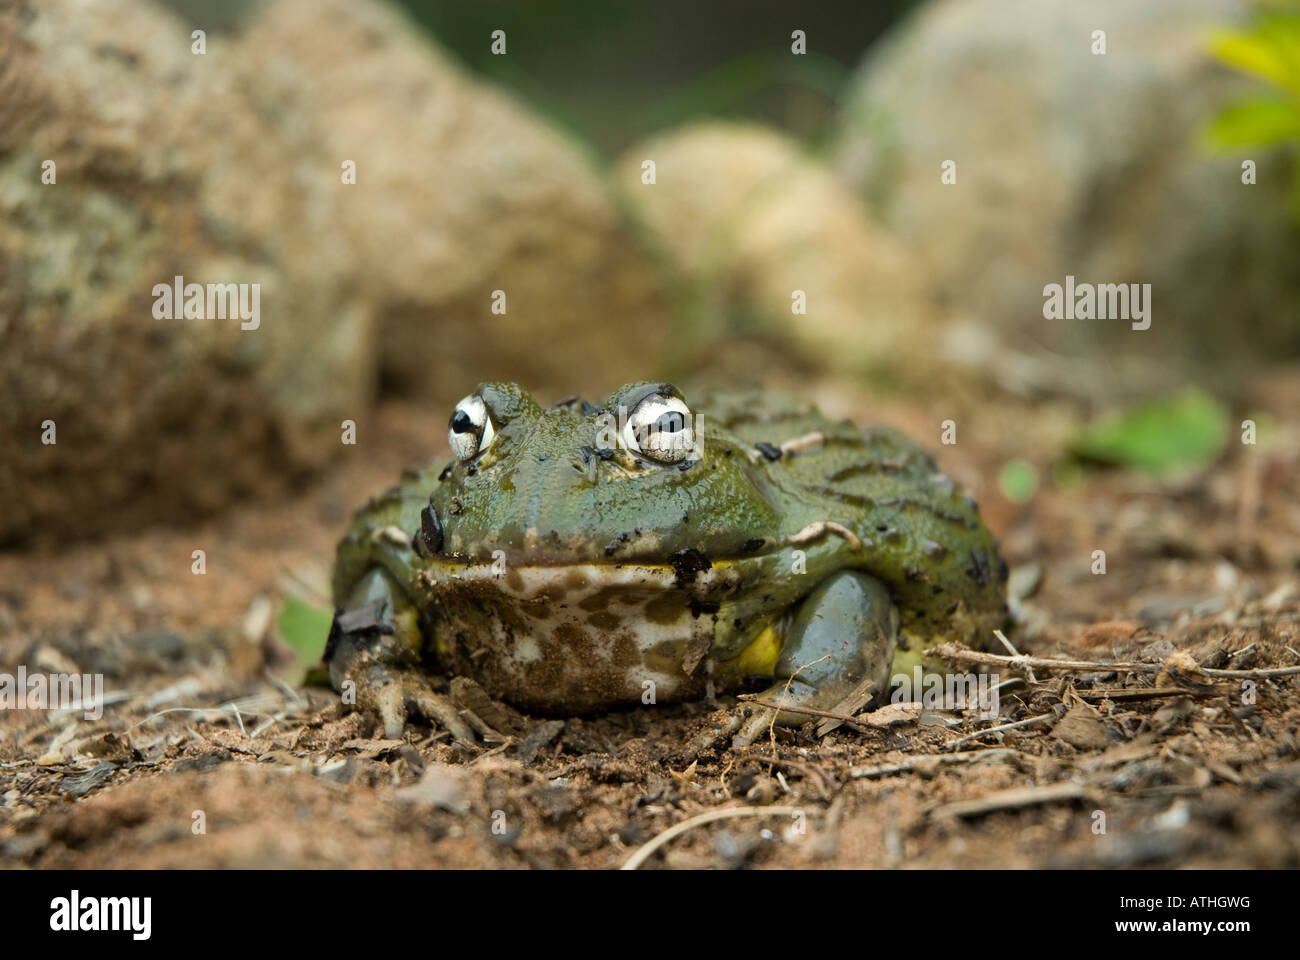 A captive giant bullfrog posing in the dirt, taken under controlled conditions Stock Photo